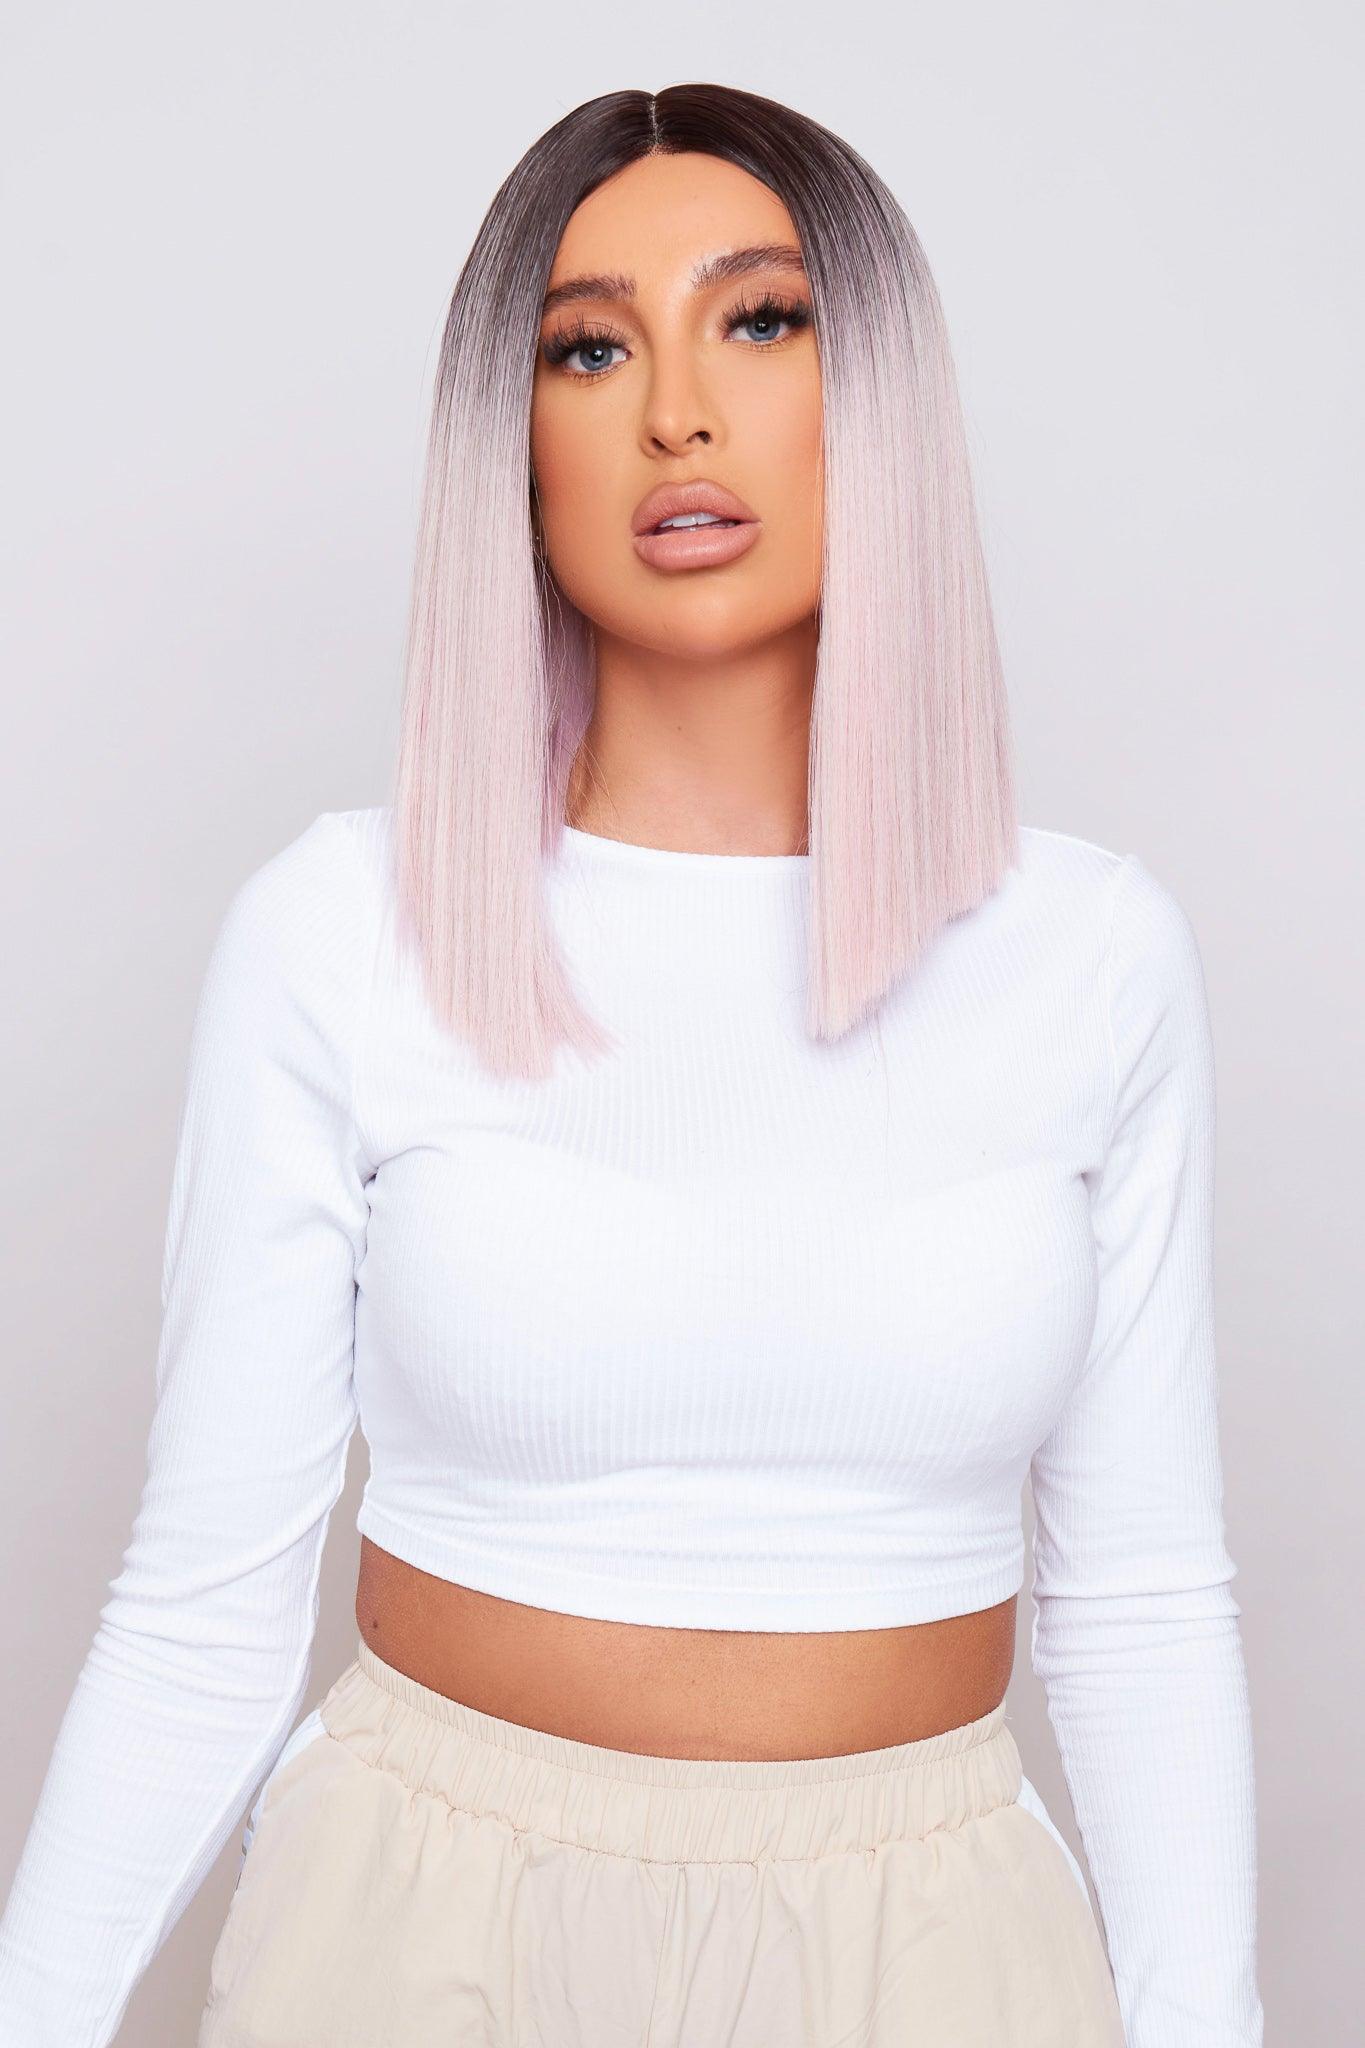 pink long bob synthetic hair wig from pbeauty hair being worn by chloe baker